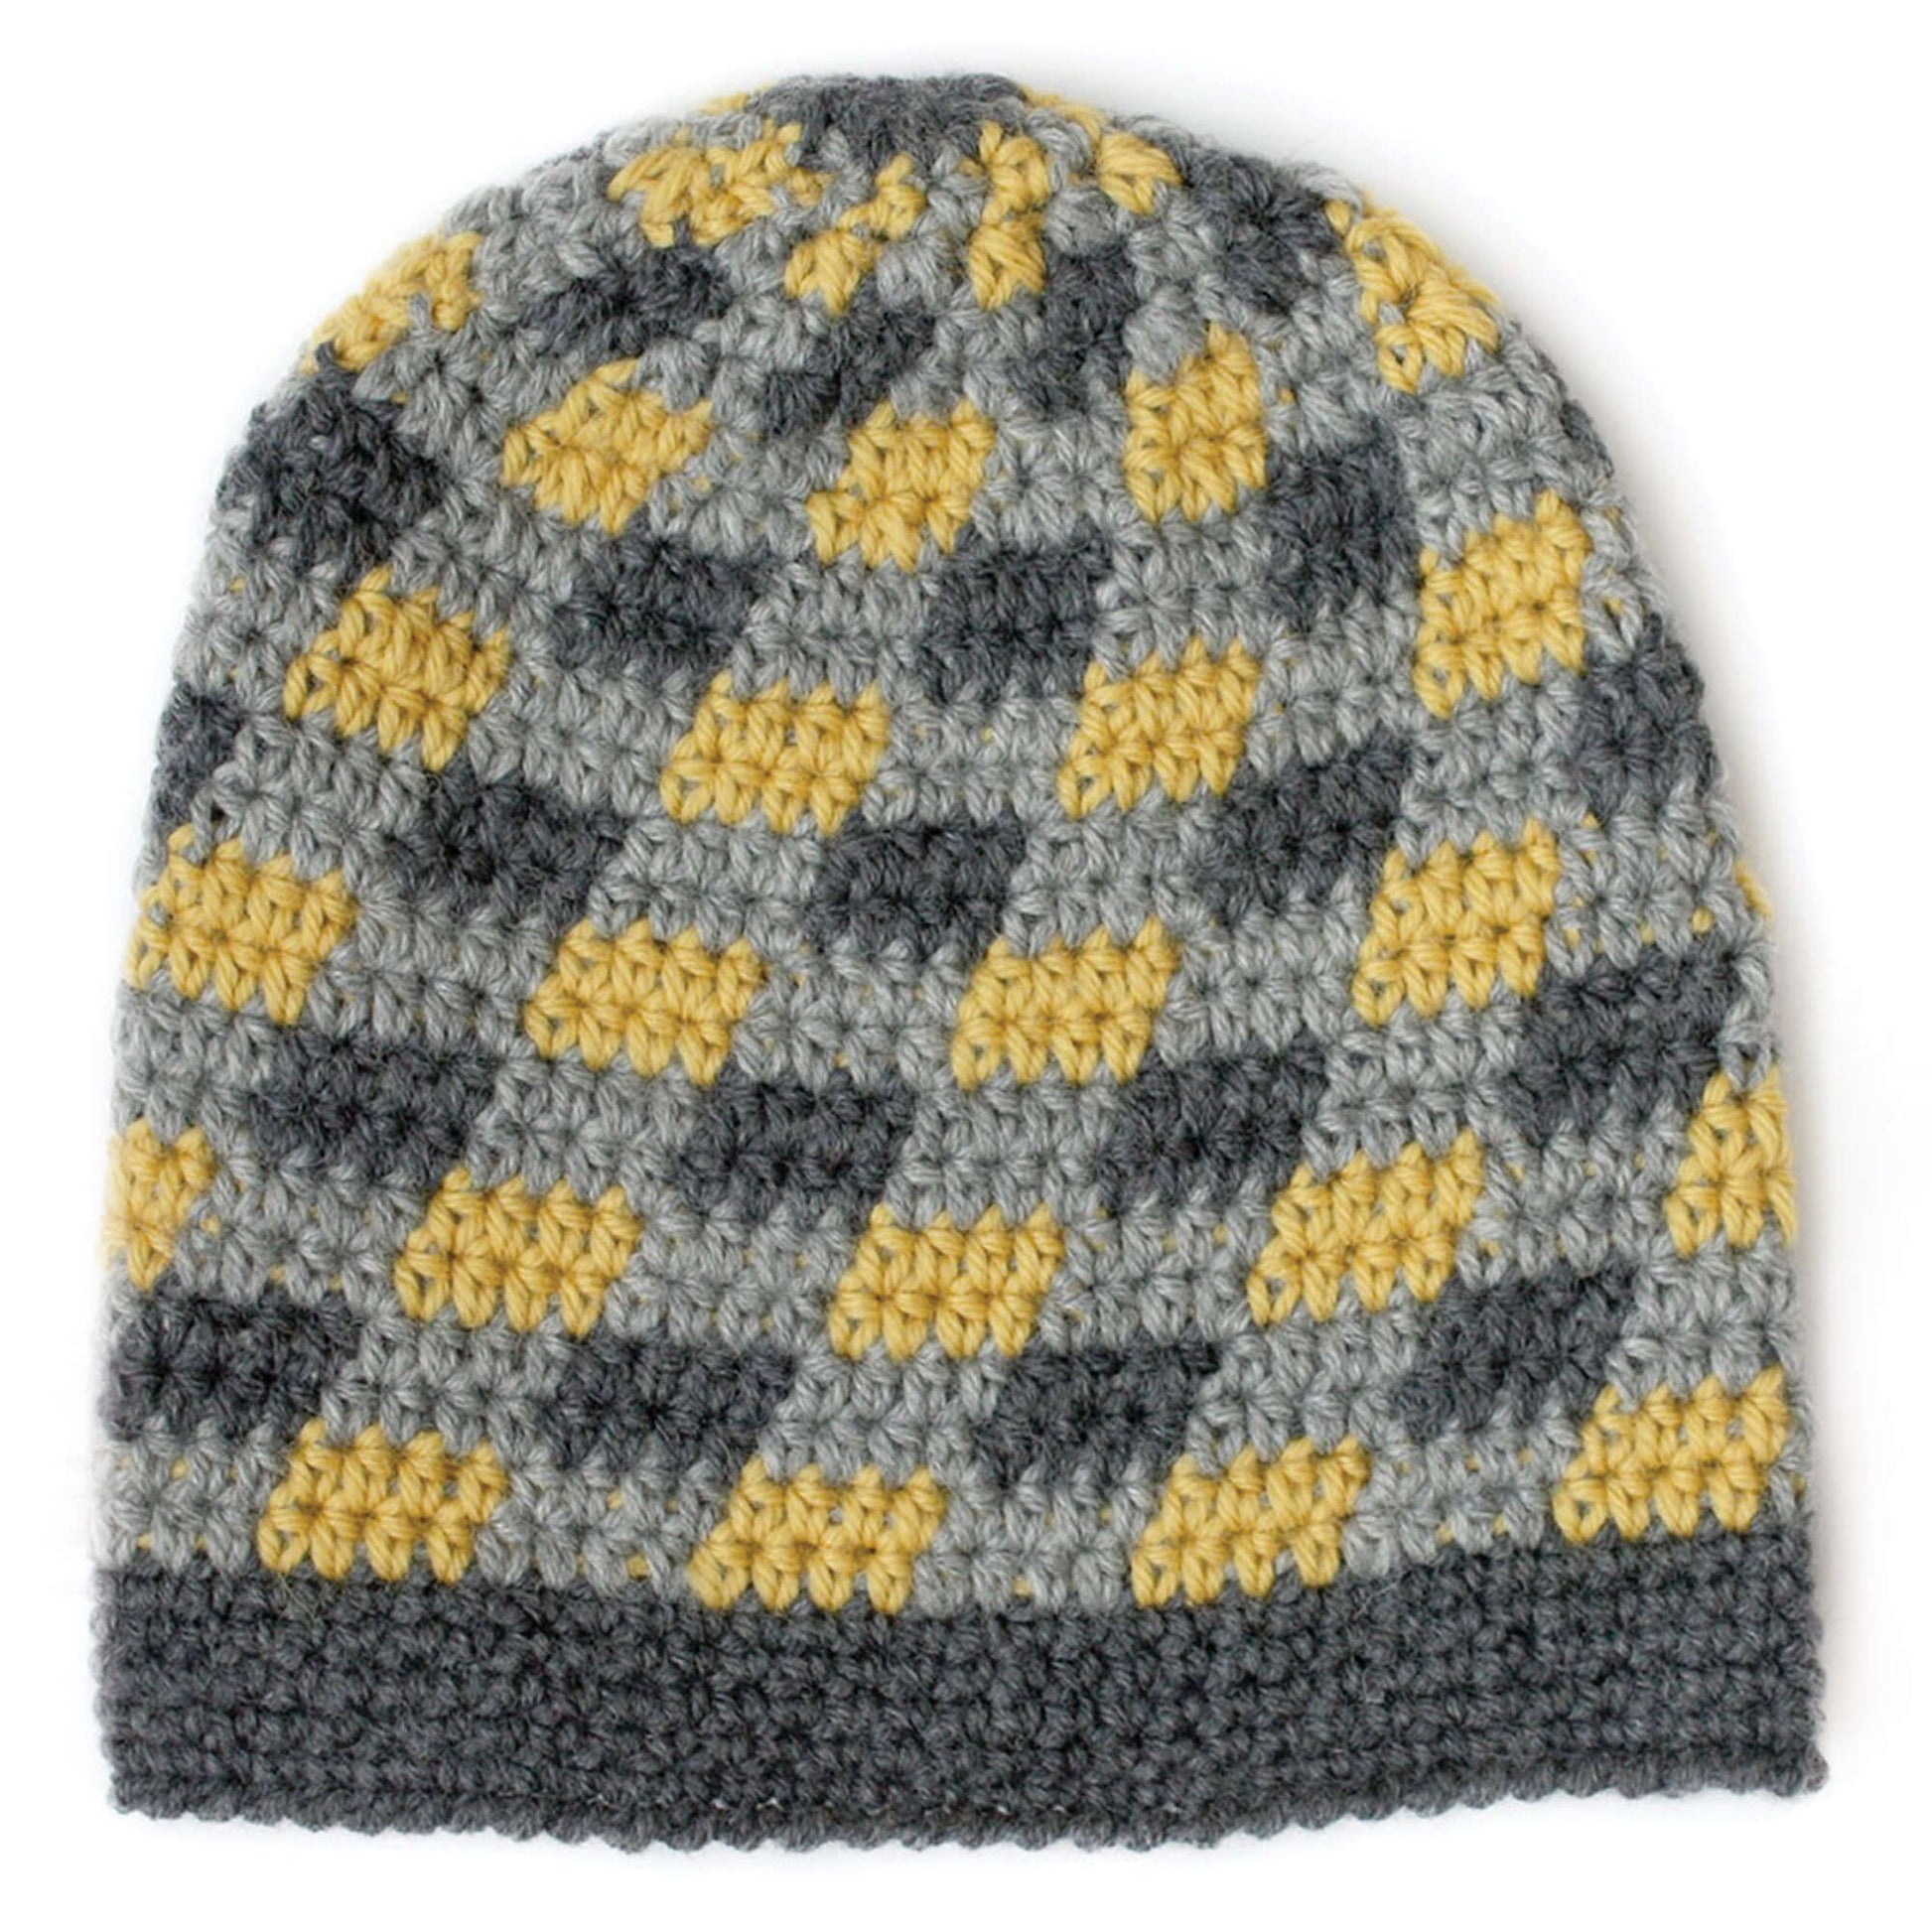 Free Patons Plaid Slouchy Beanie Pattern